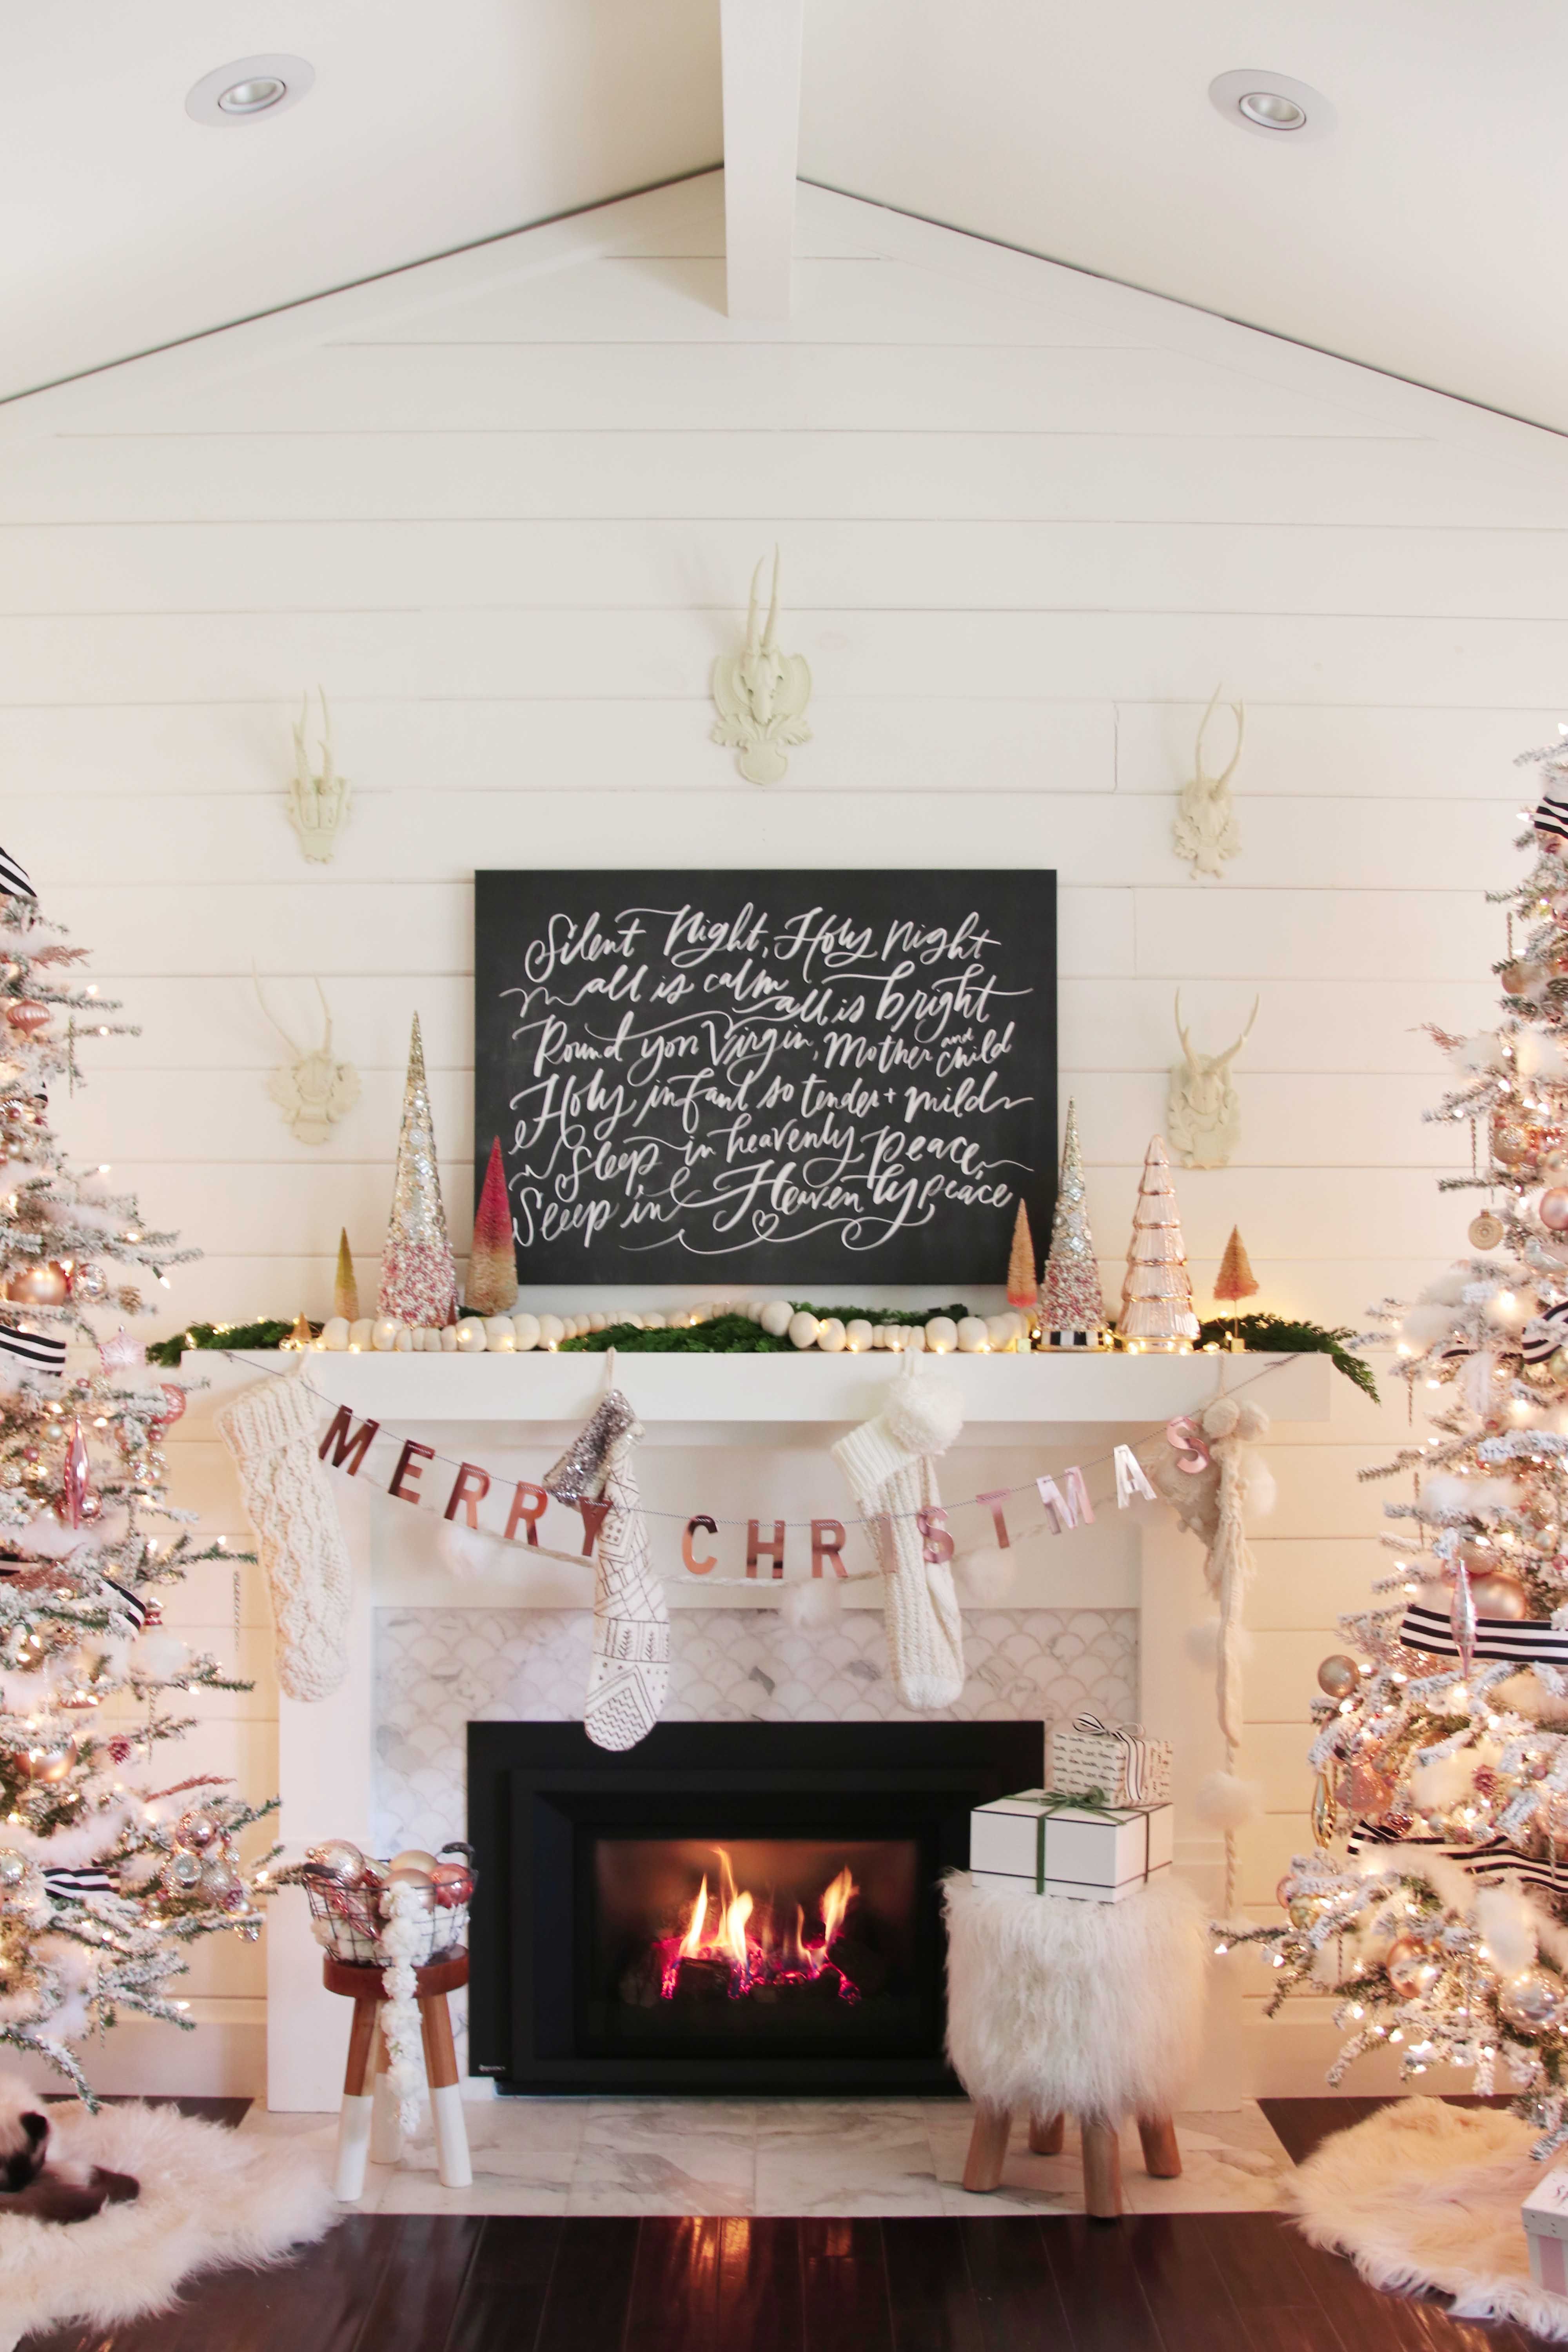 Driftwood Fireplace Mantel Beautiful Christmas Mantel Ideas How to Style A Holiday Mantel